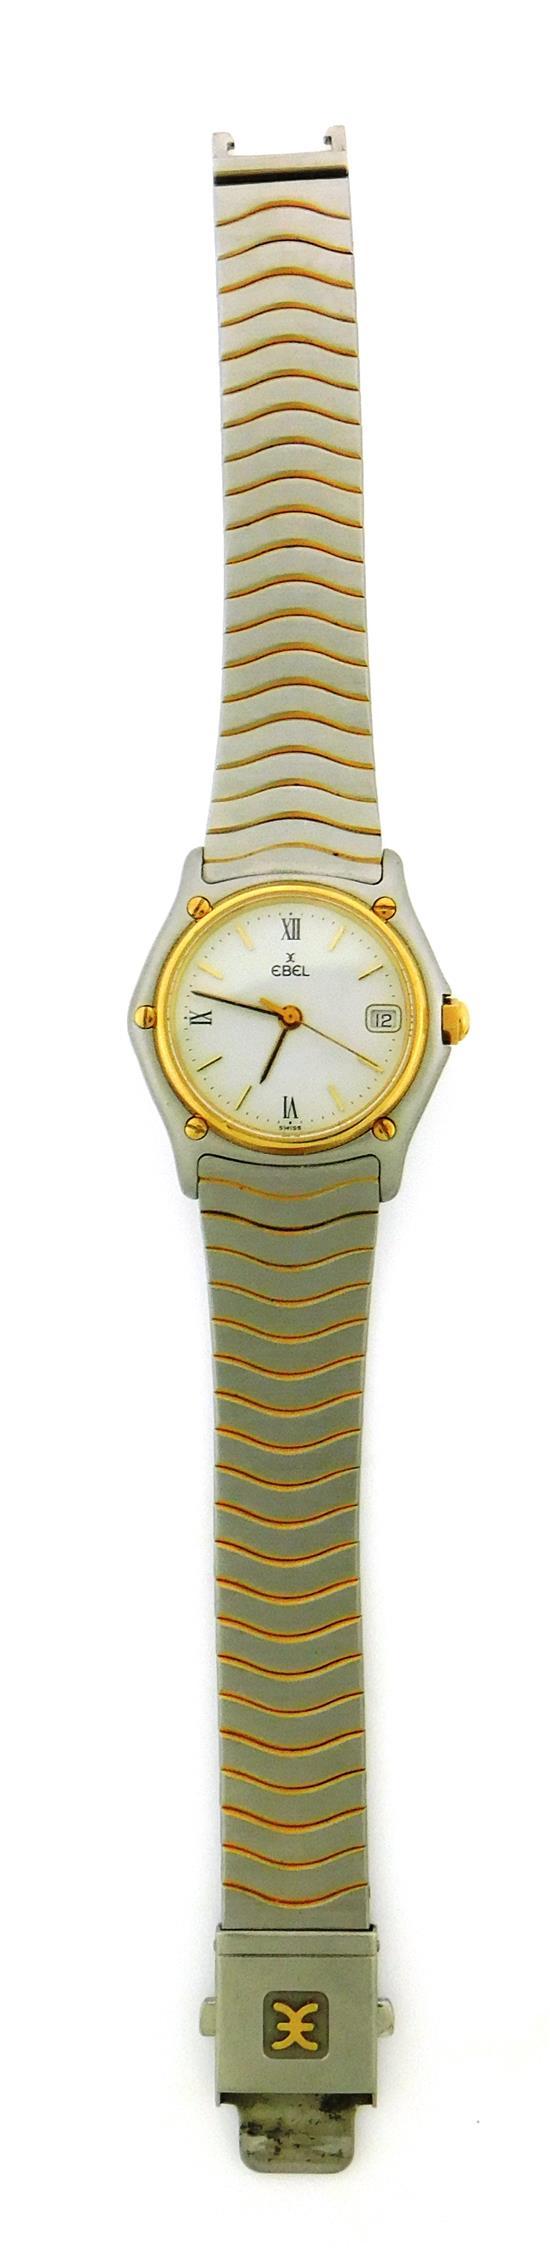 JEWELRY EBEL STEEL AND GOLD WOMAN S 31afc3